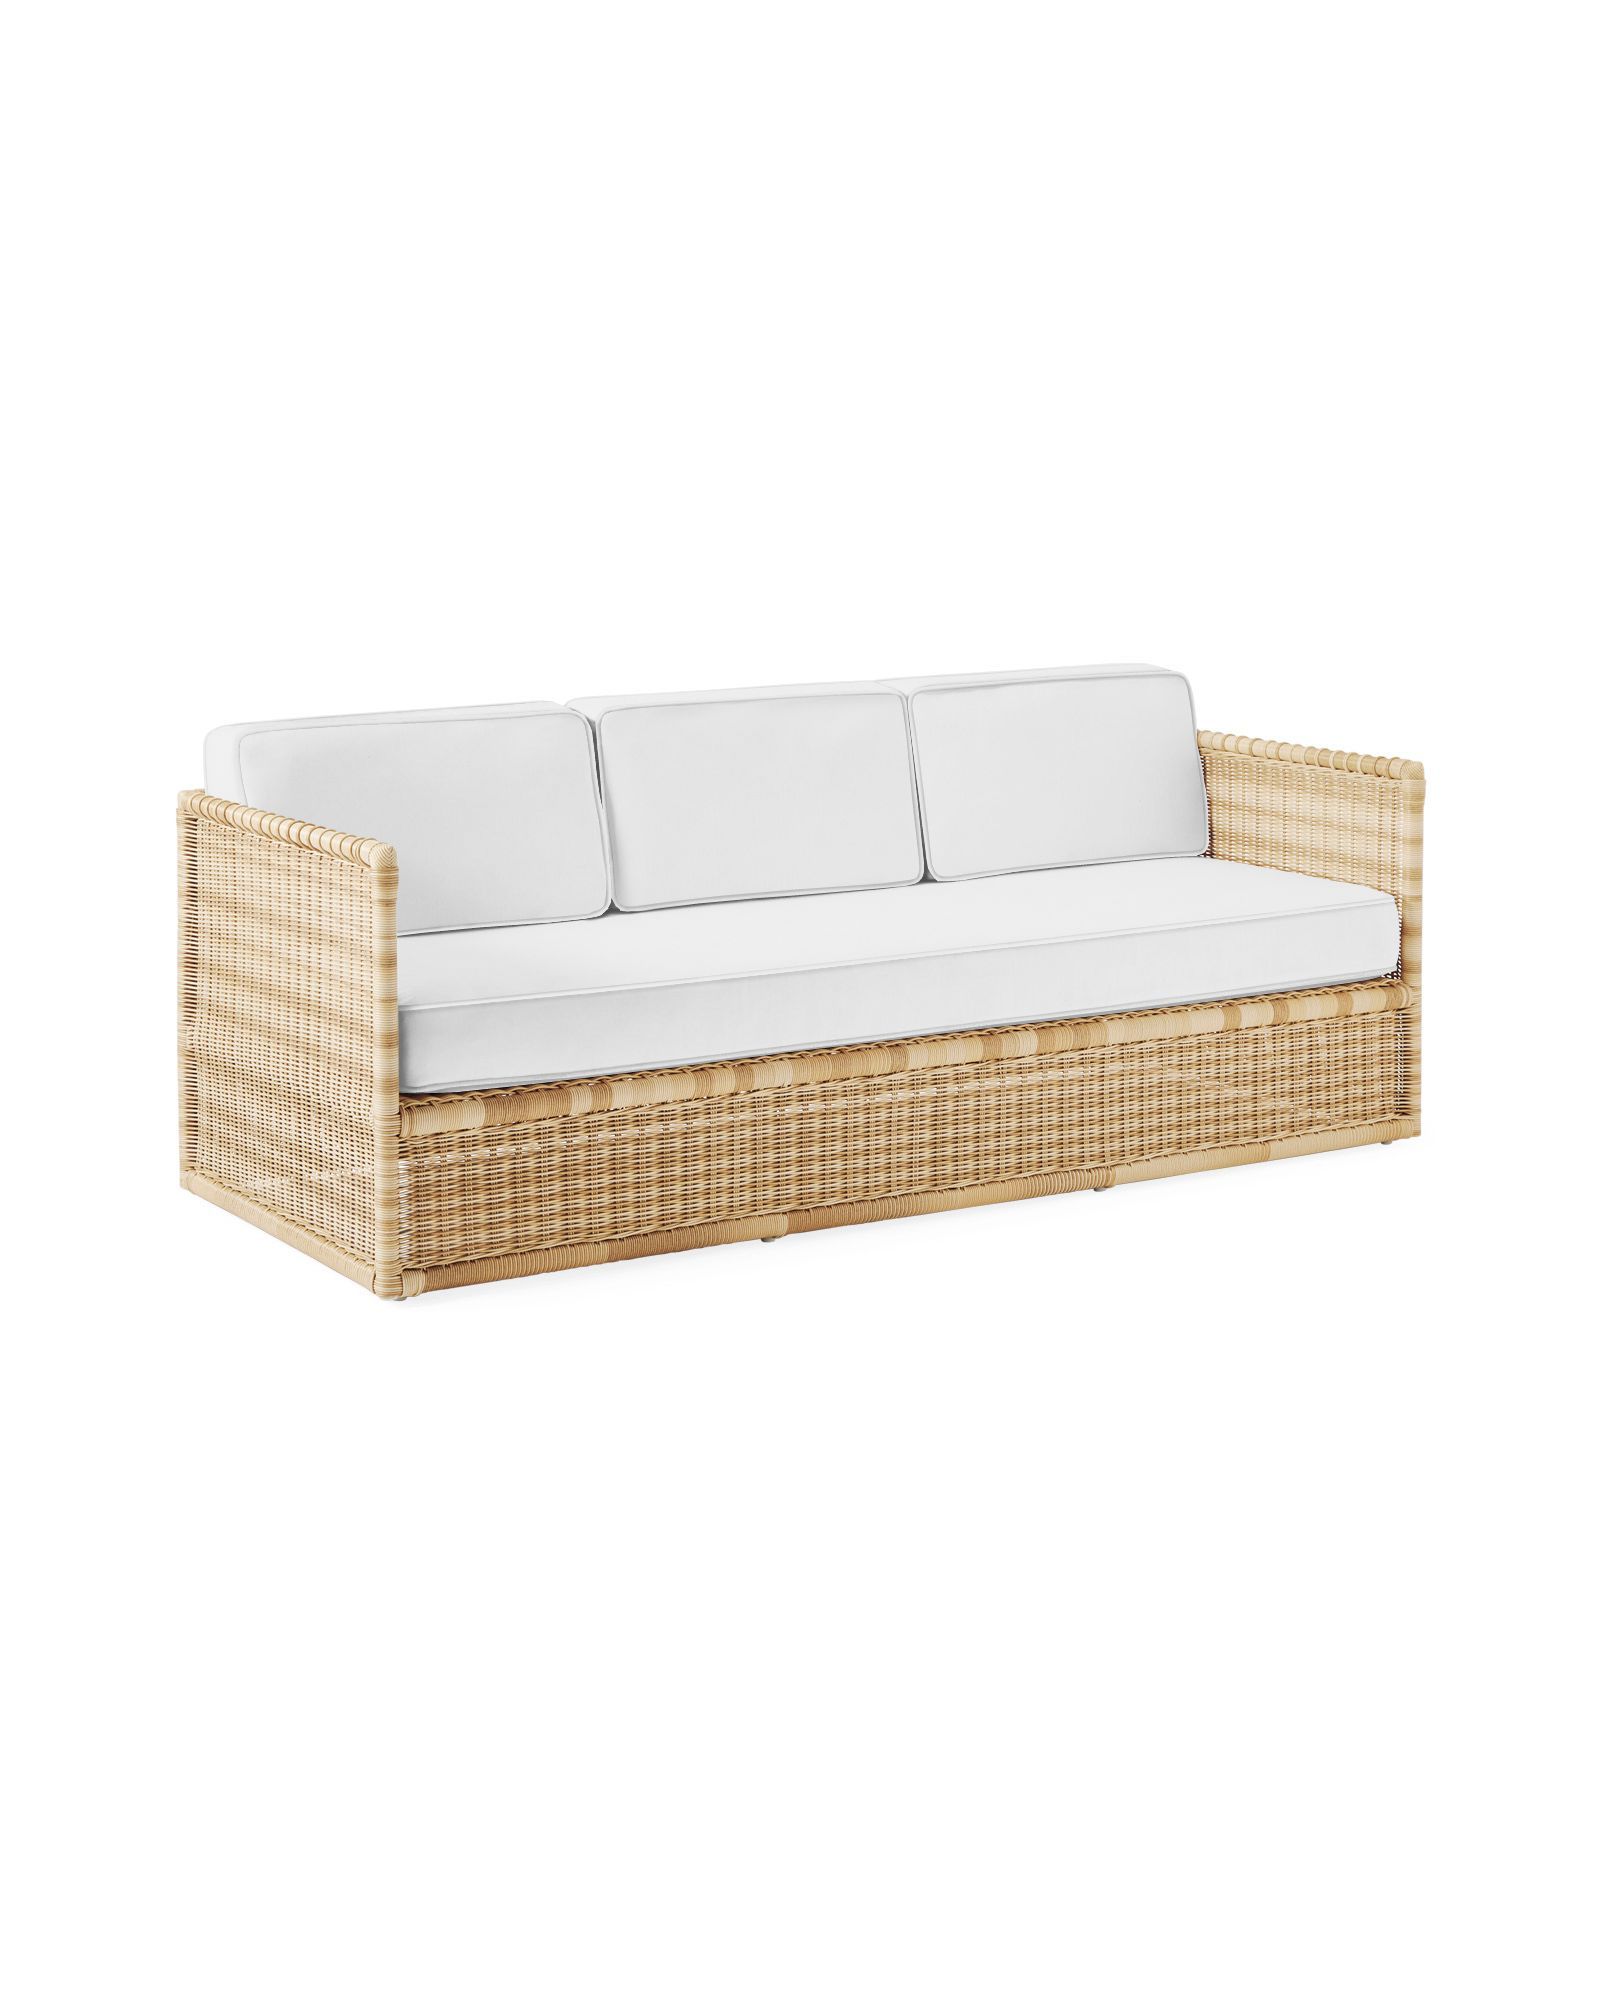 Pacifica Sofa - Light Dune | Serena and Lily